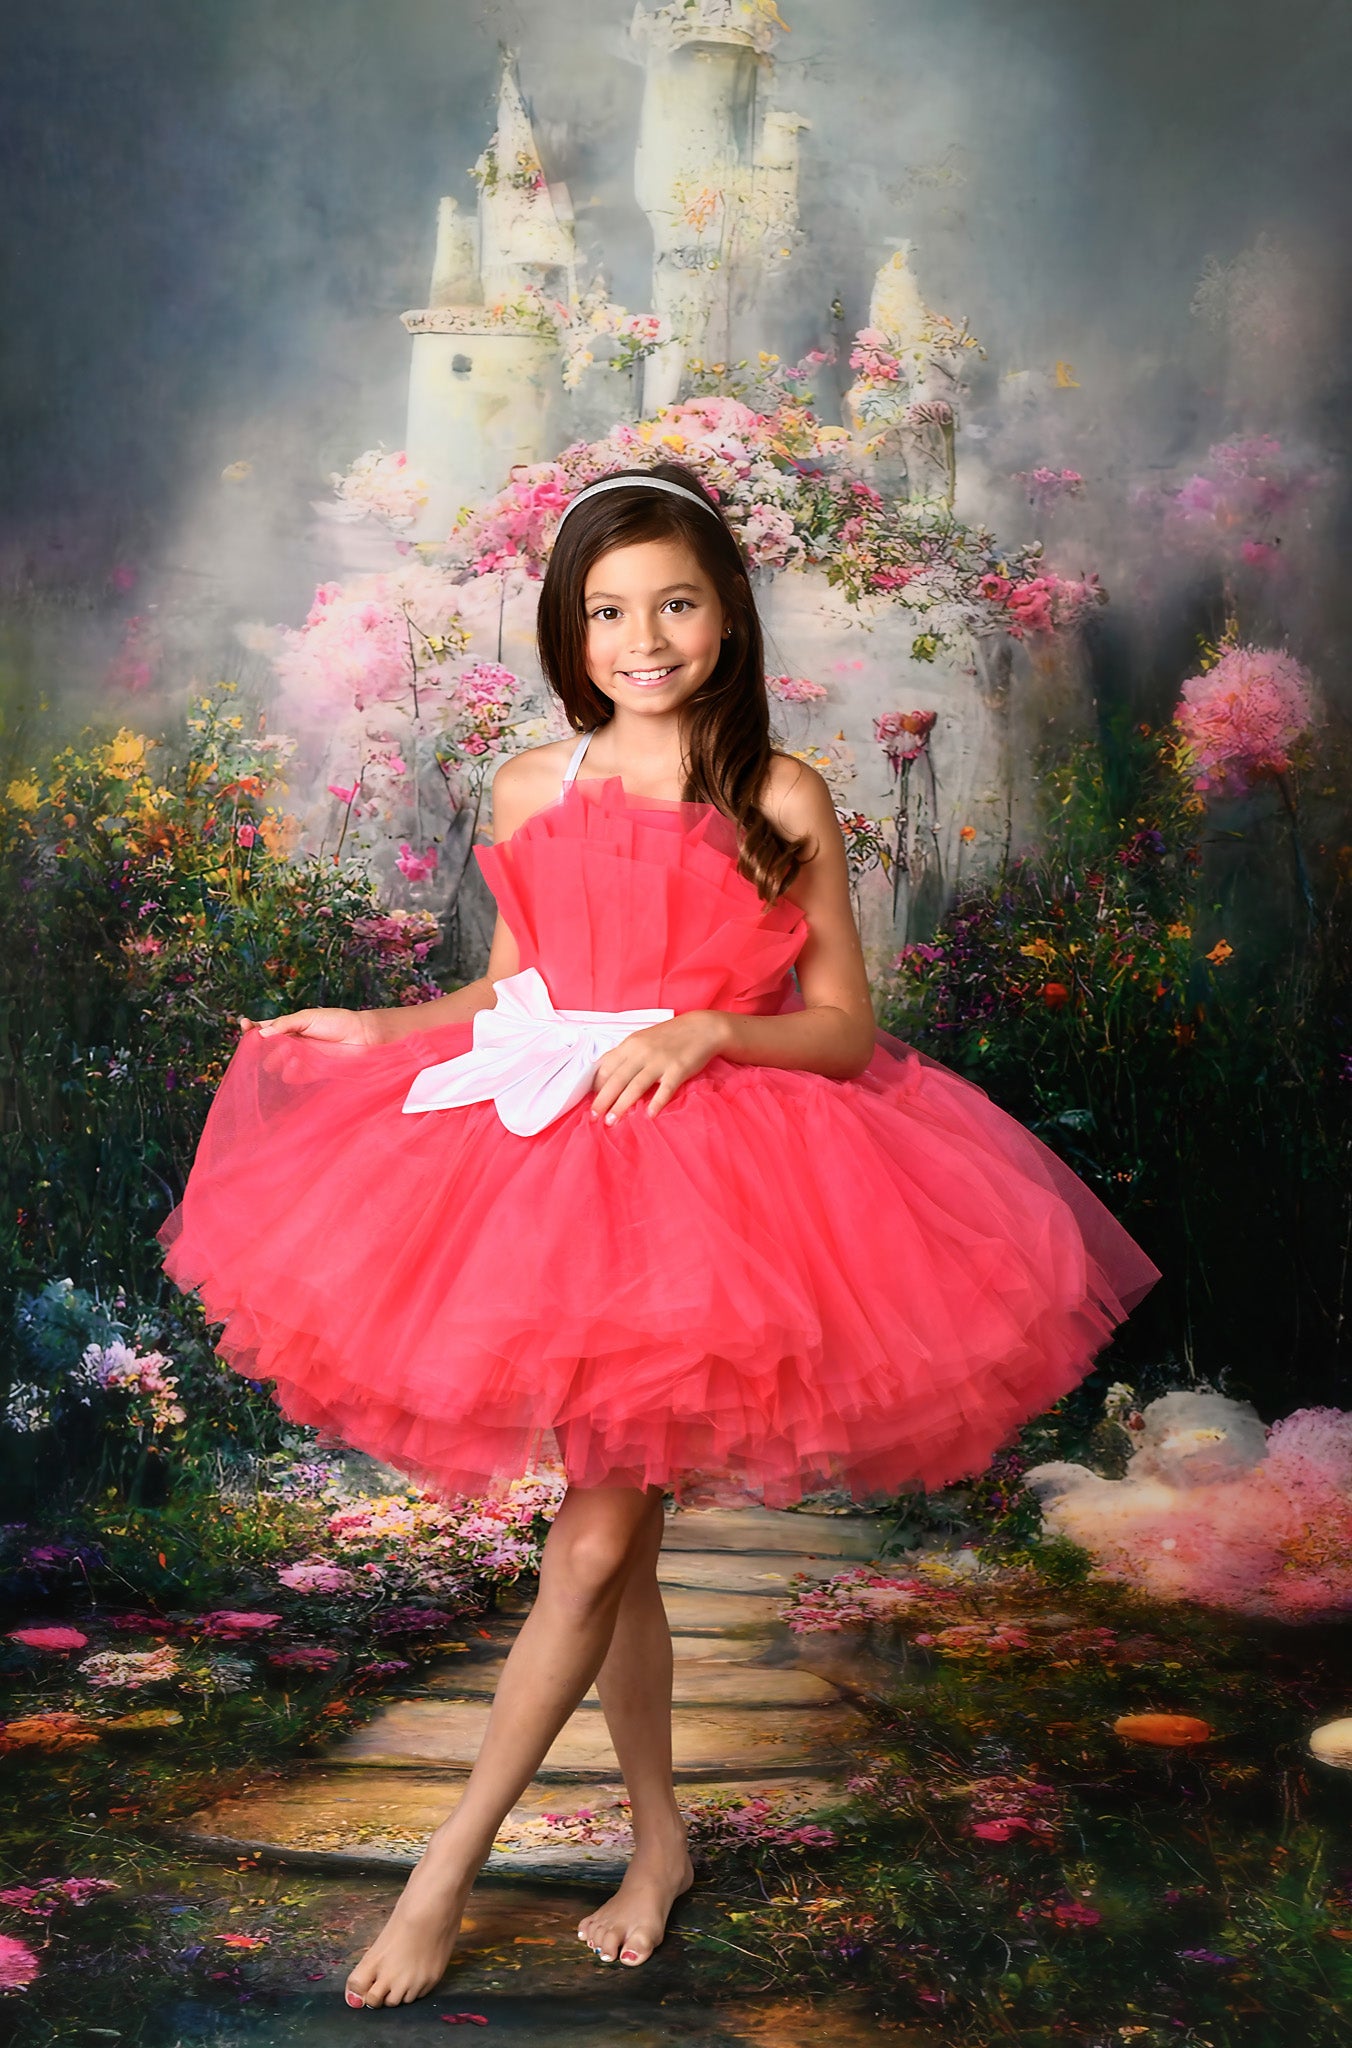 Barbie inspired gowns, barbie themed dress, short  rental gown, Girls tulle gowns, dream dress sessions, girls rental gowns- Girls dresses for photography sessions. 